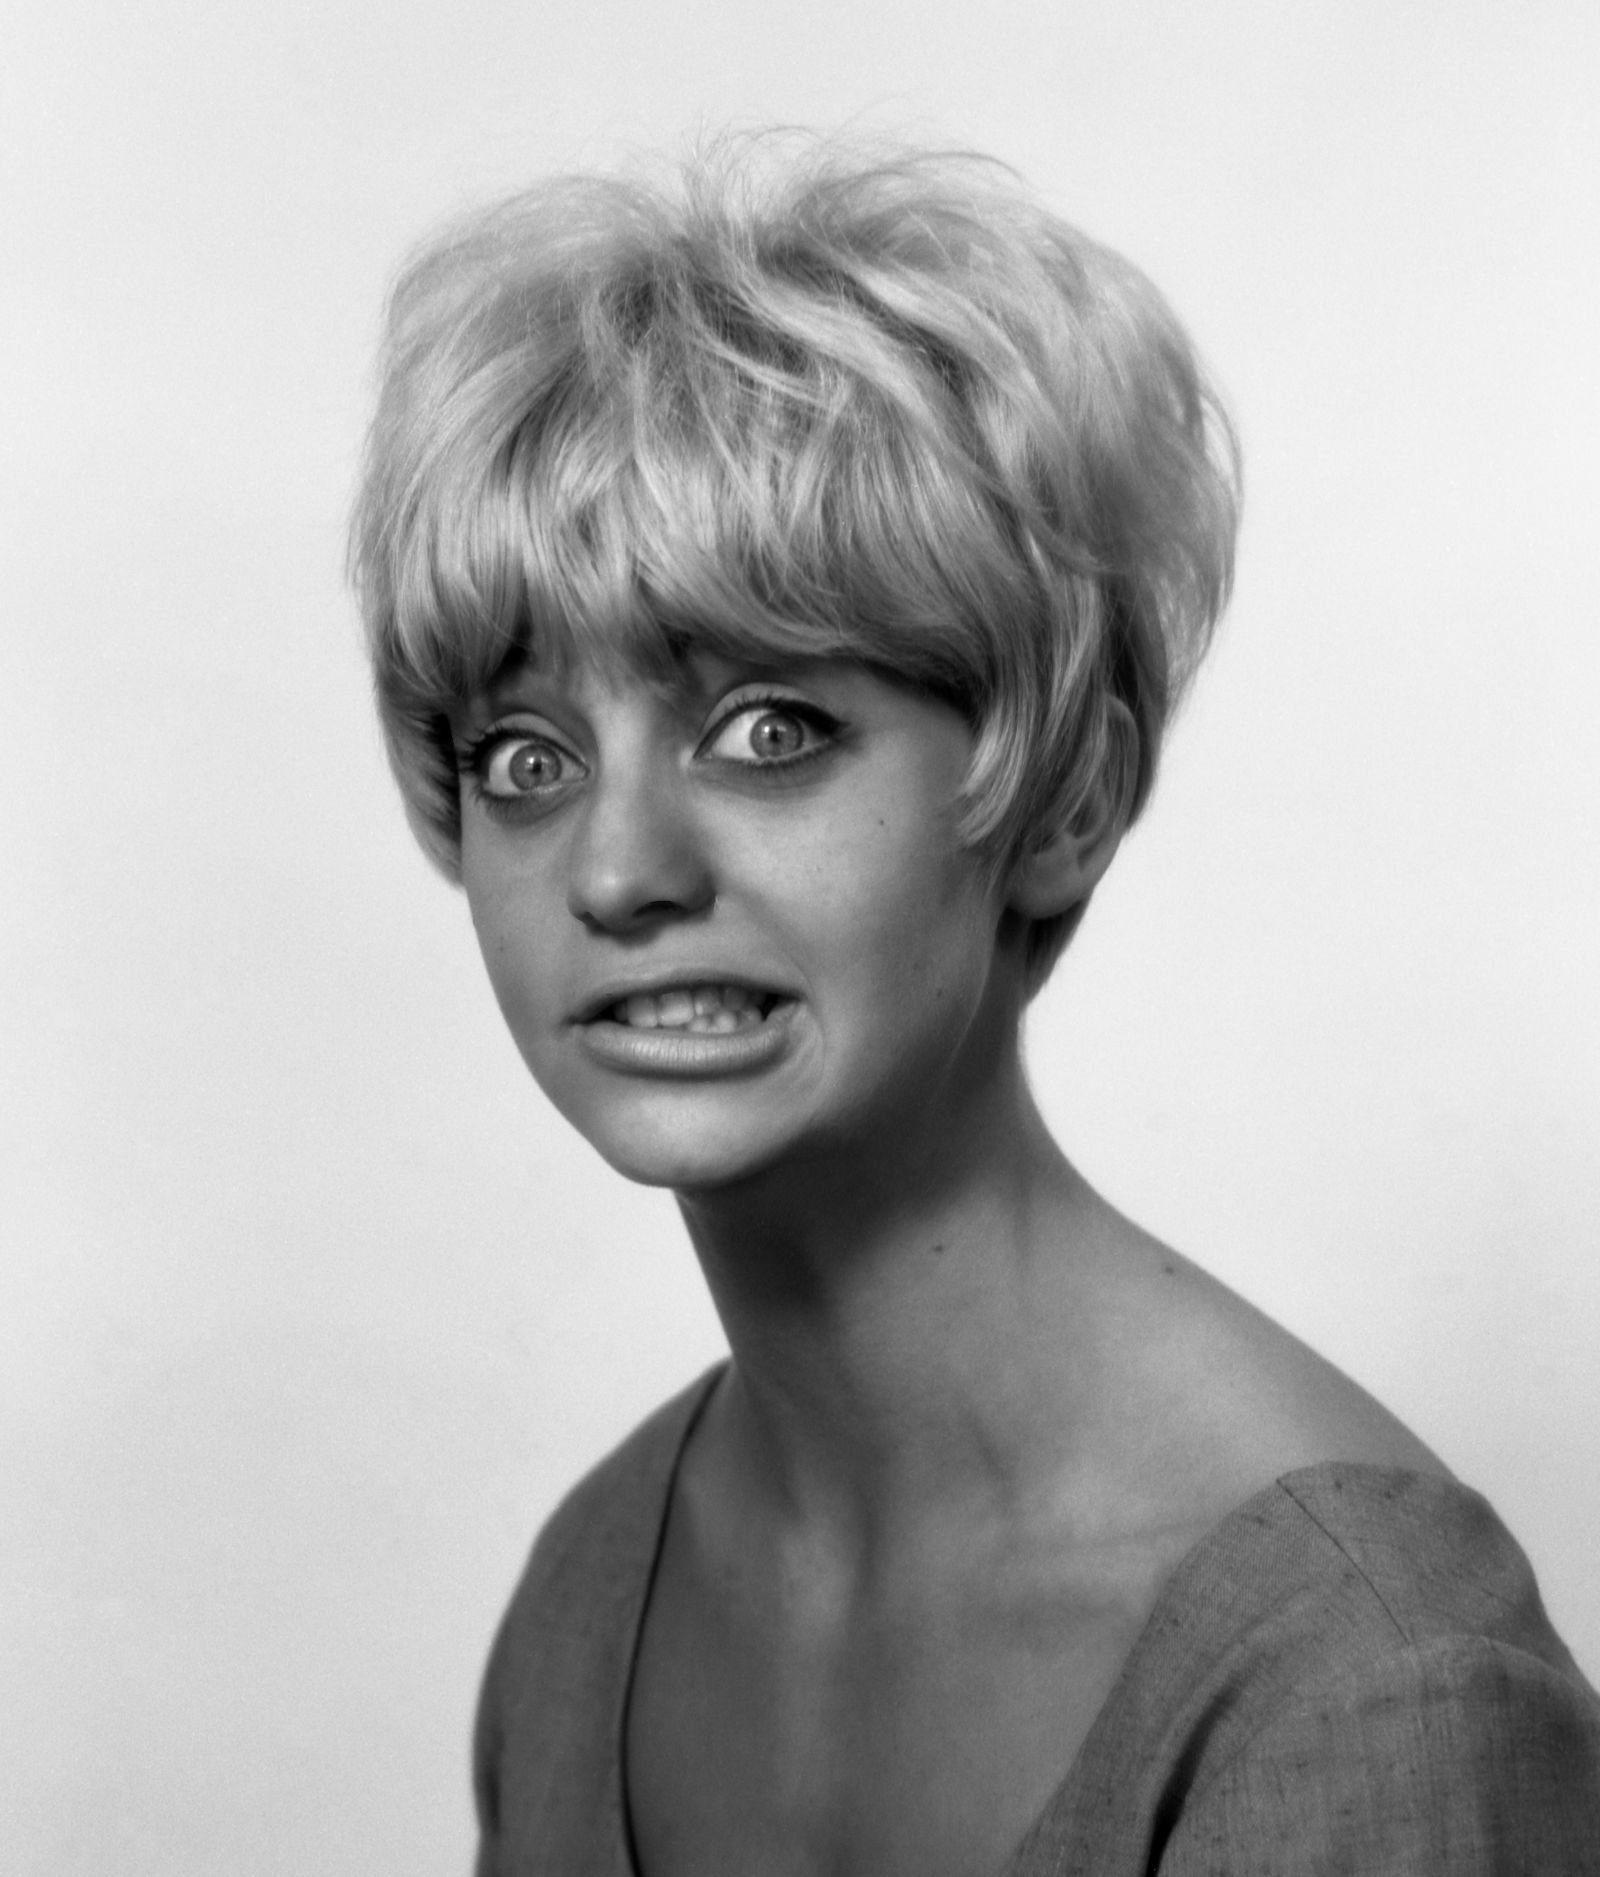 My unwavering love for Goldie Hawn, one of the most talented actors ever.
Happy birthday Goldie. 